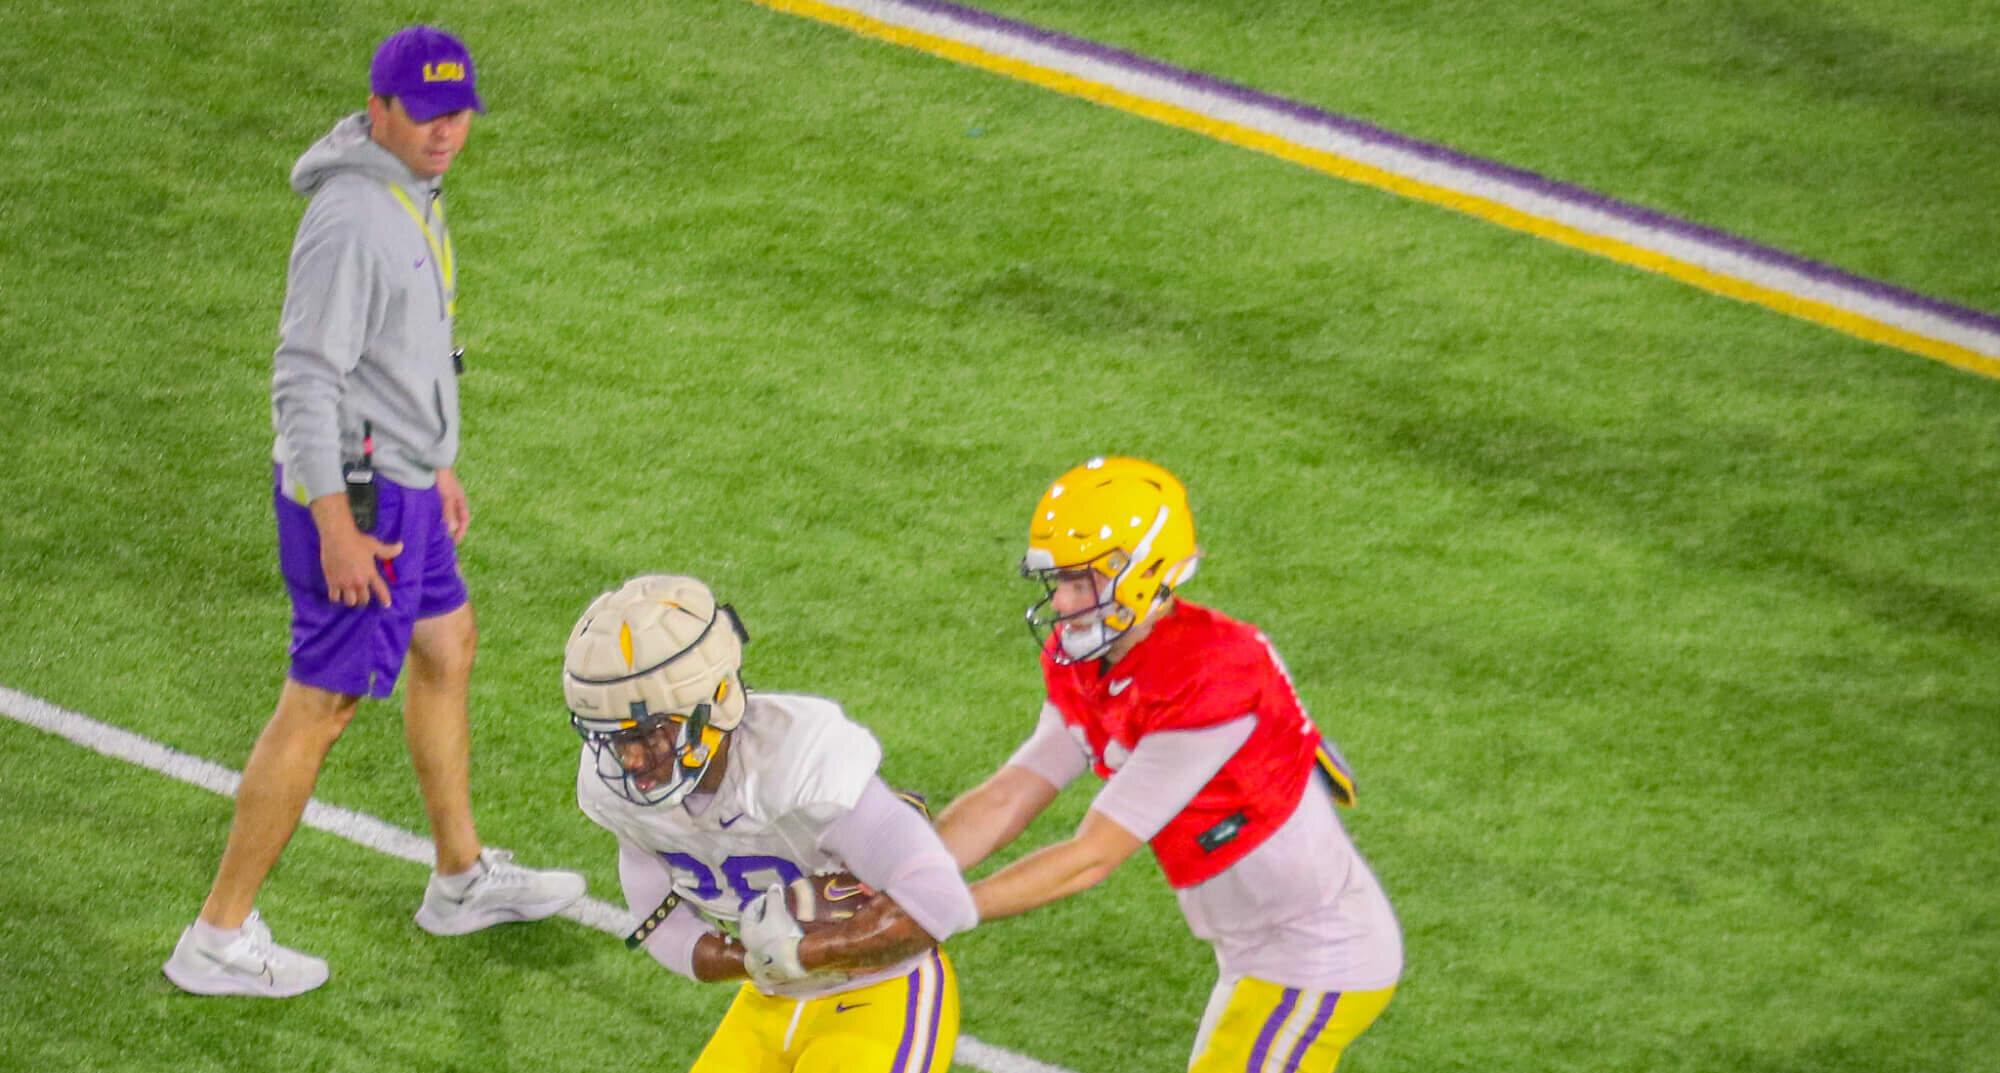 LSU Spring Practice Report #5: Joe Sloan Discusses Offensive Identity and Building on Recent Success